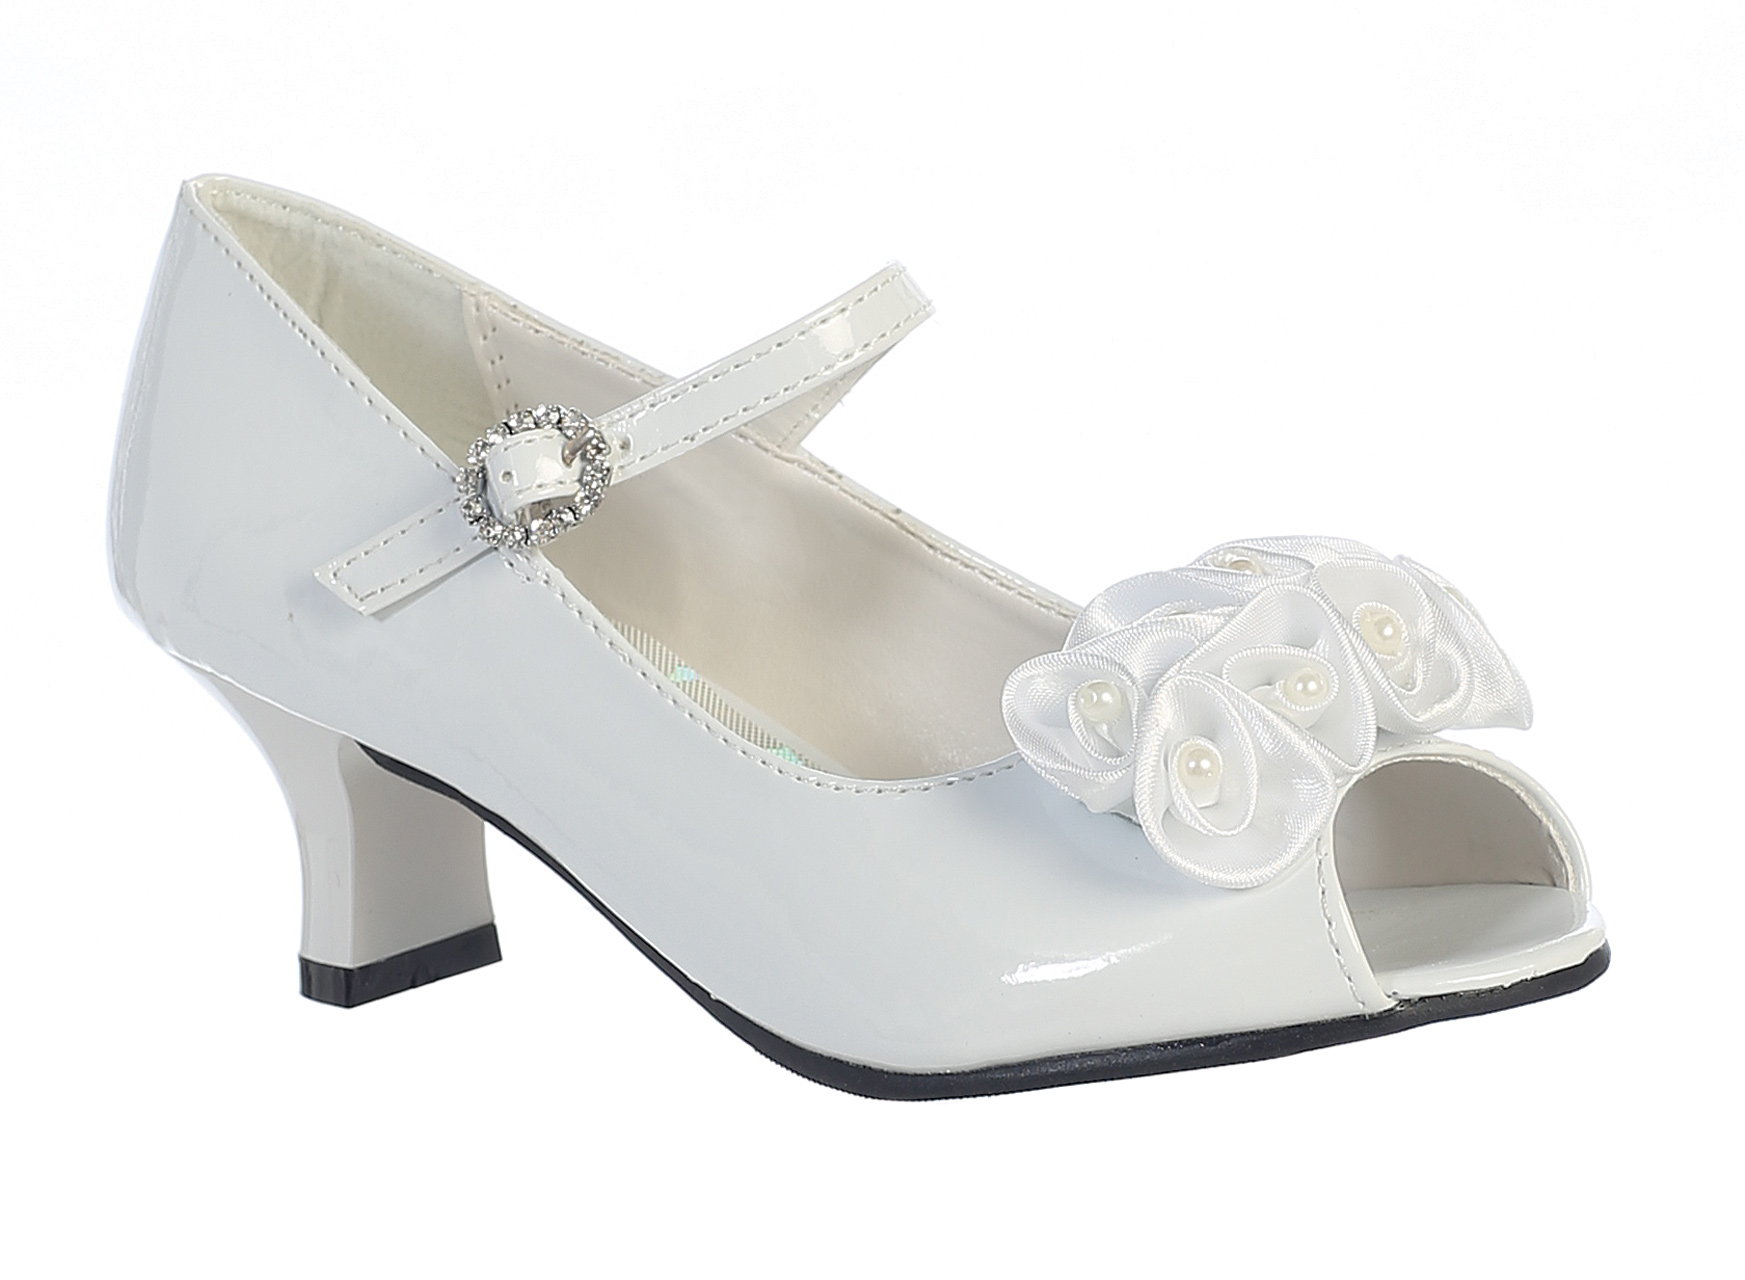 Christening Day Inch Heals with Rosette Bow Front